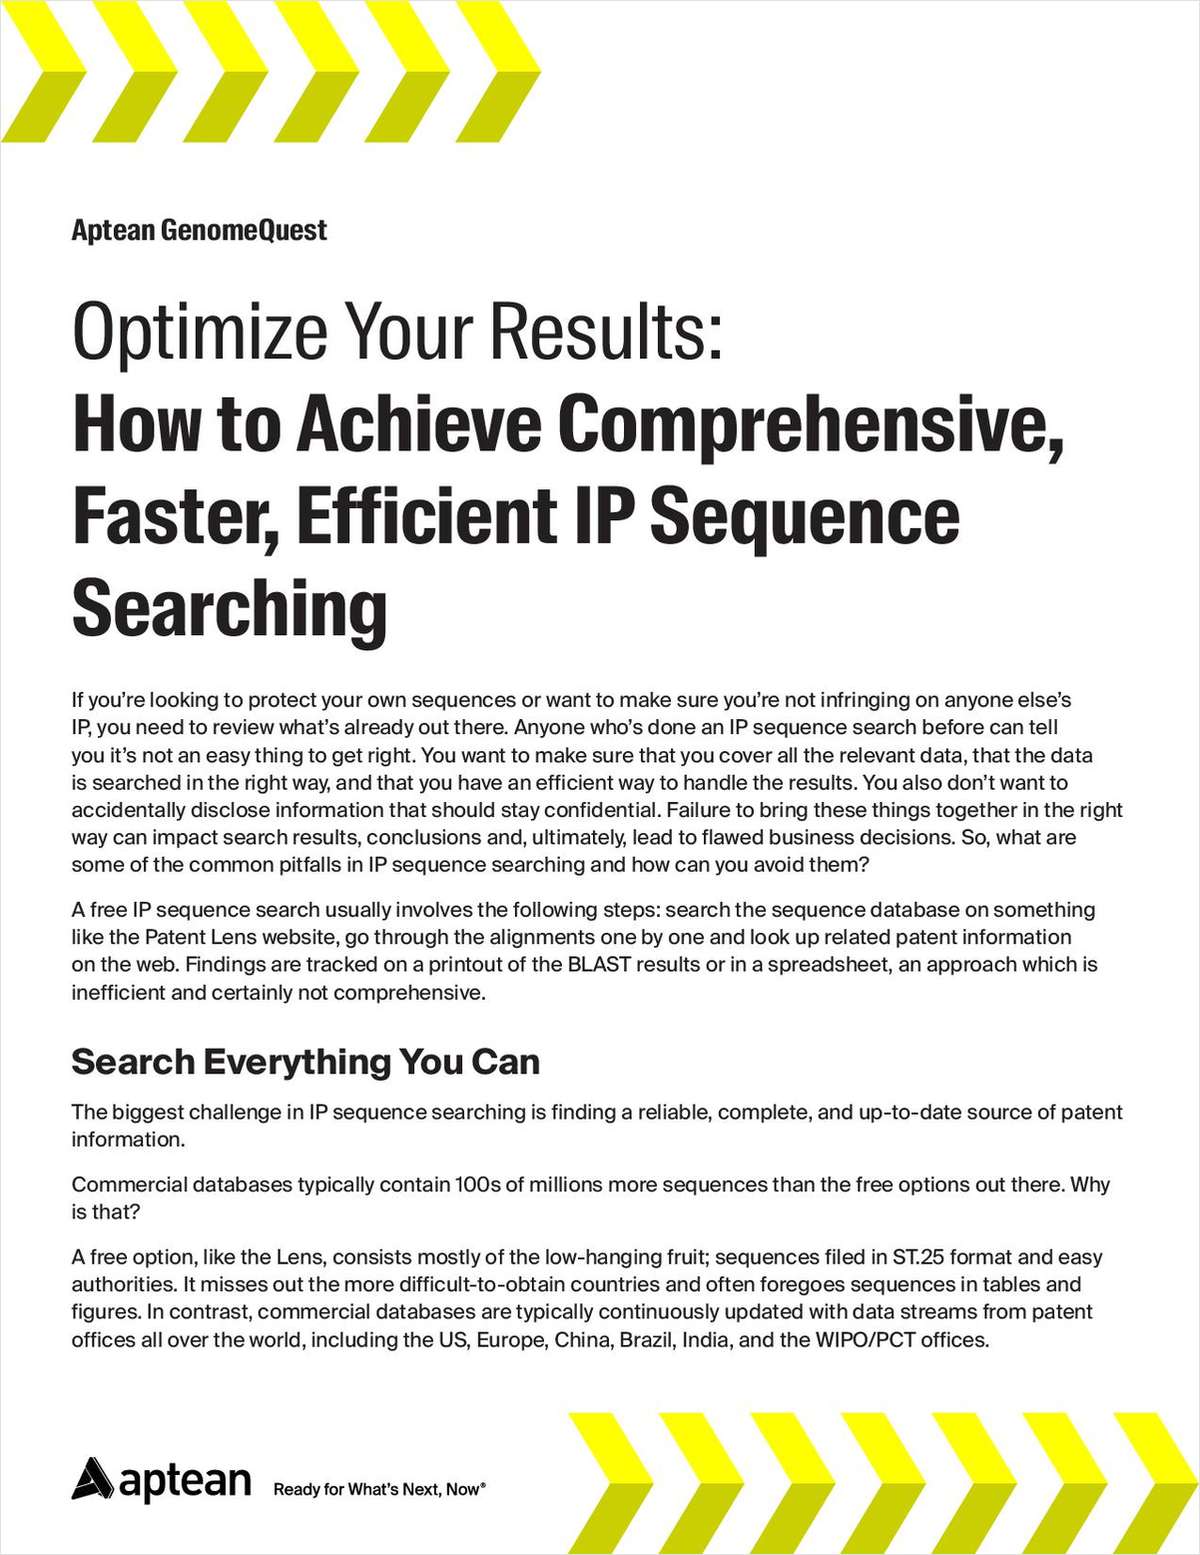 Optimize Your Results: How to Achieve Comprehensive, Faster, Efficient IP Sequence Searching